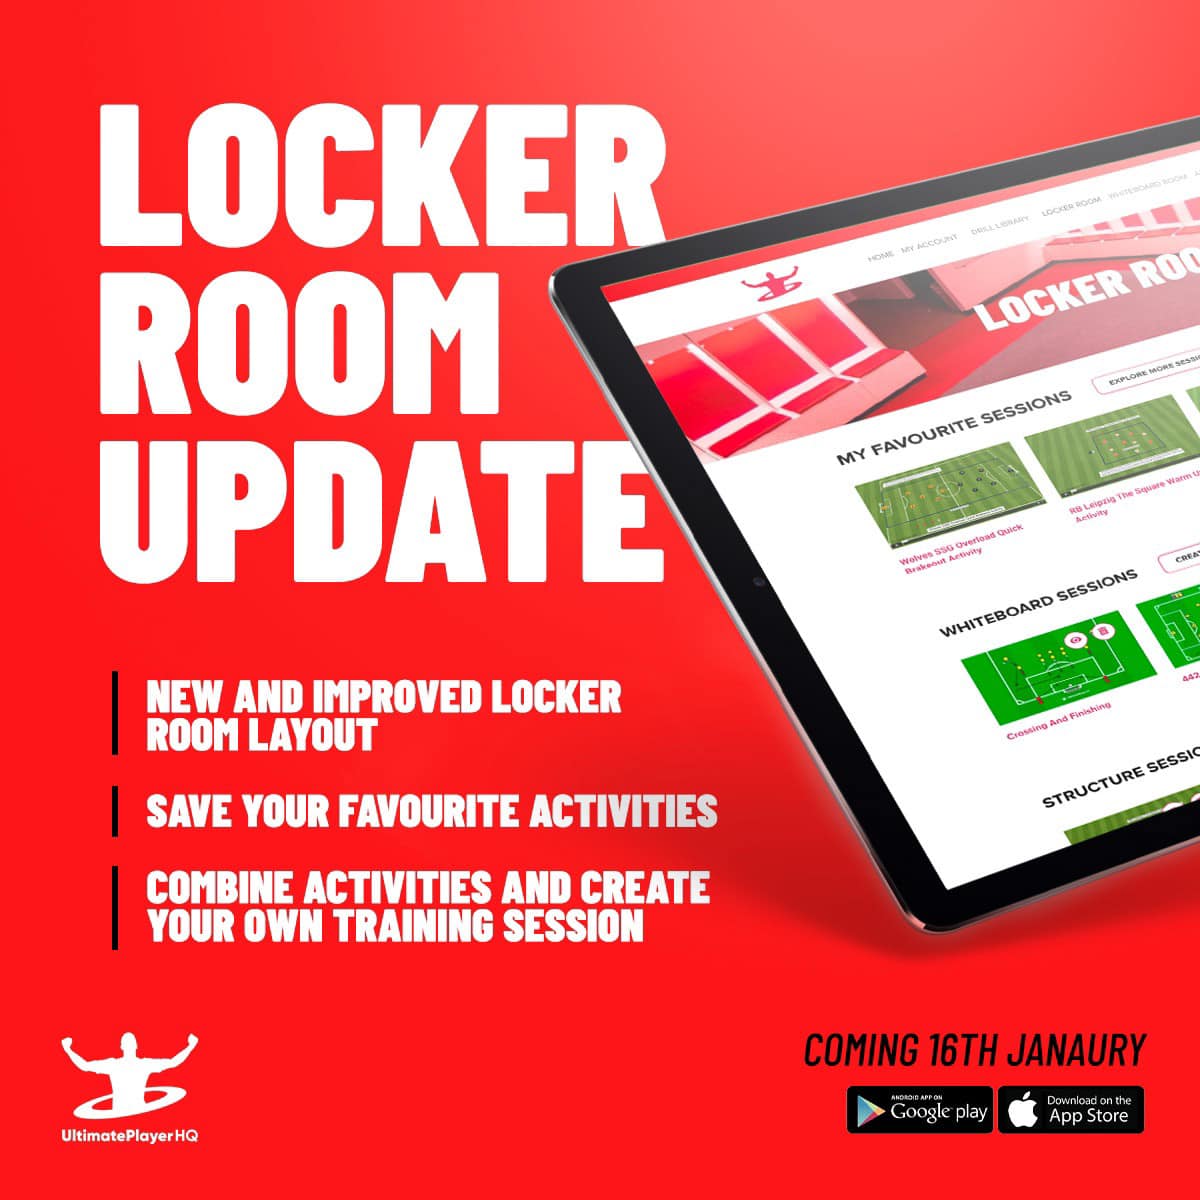 New @playersessionHQ feature! Now design, build and save full sessions! Now available at ultimateplayerhq.com.